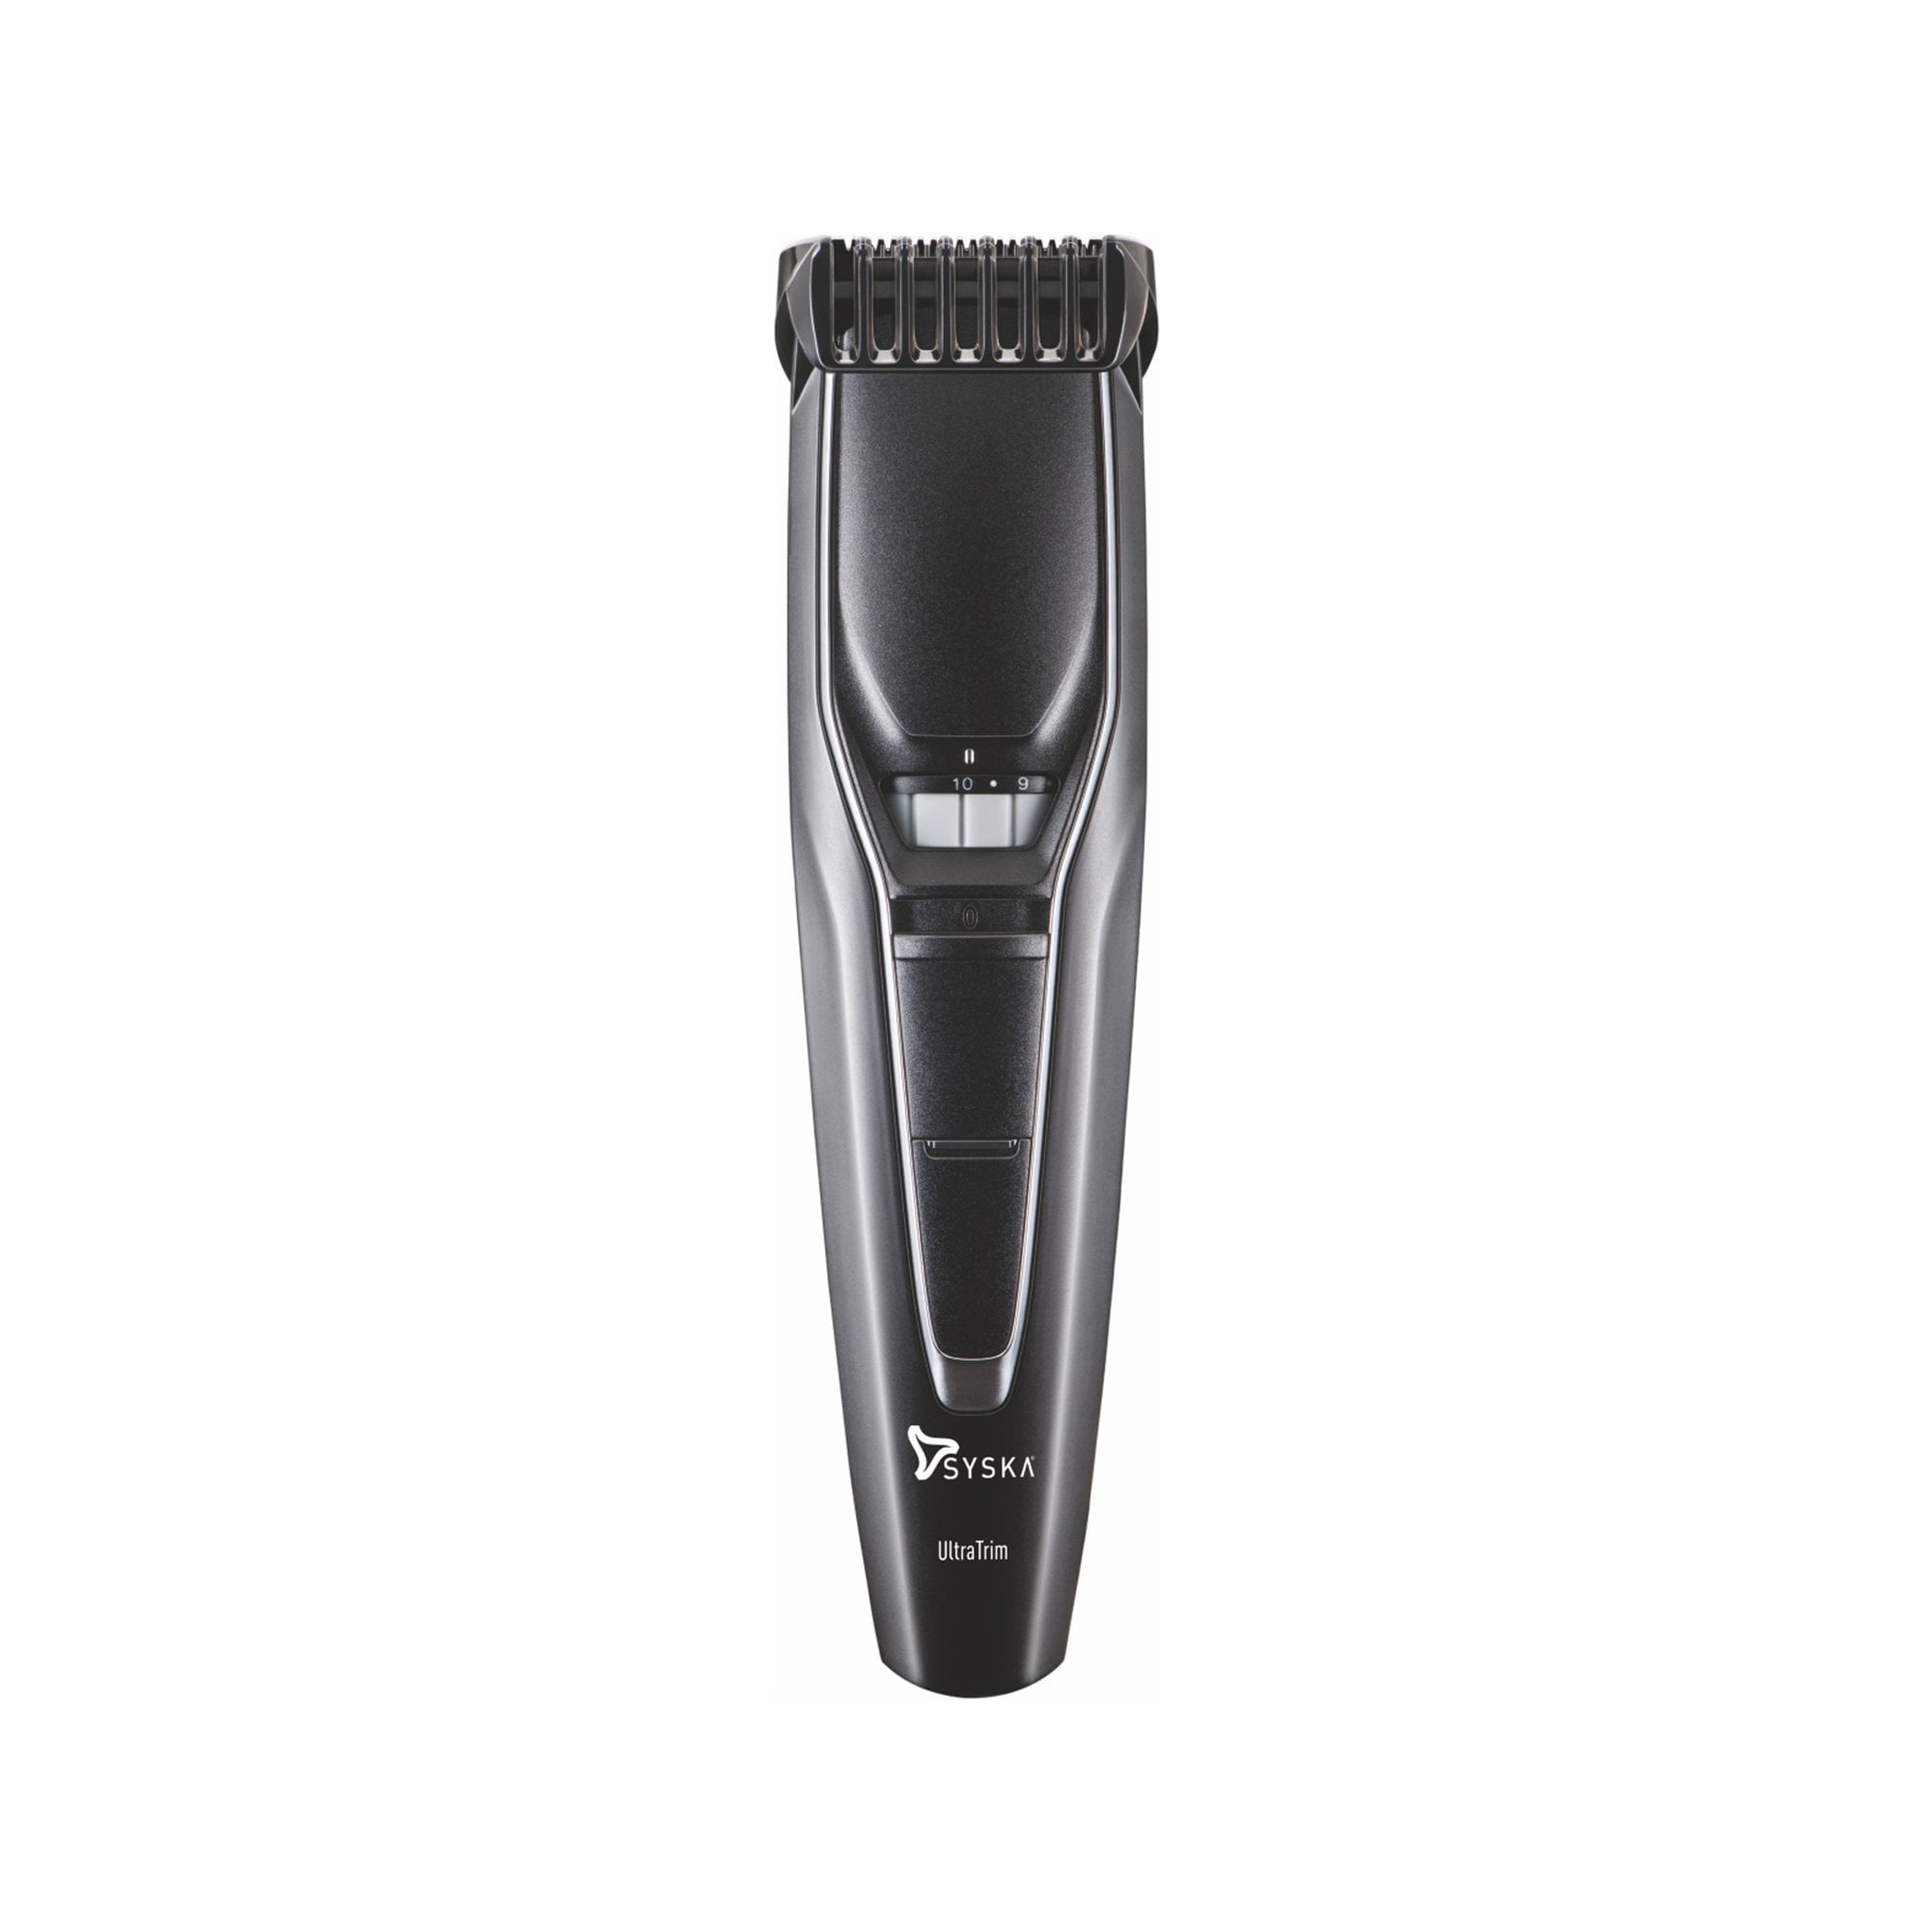 wahl cordless clippers ebay